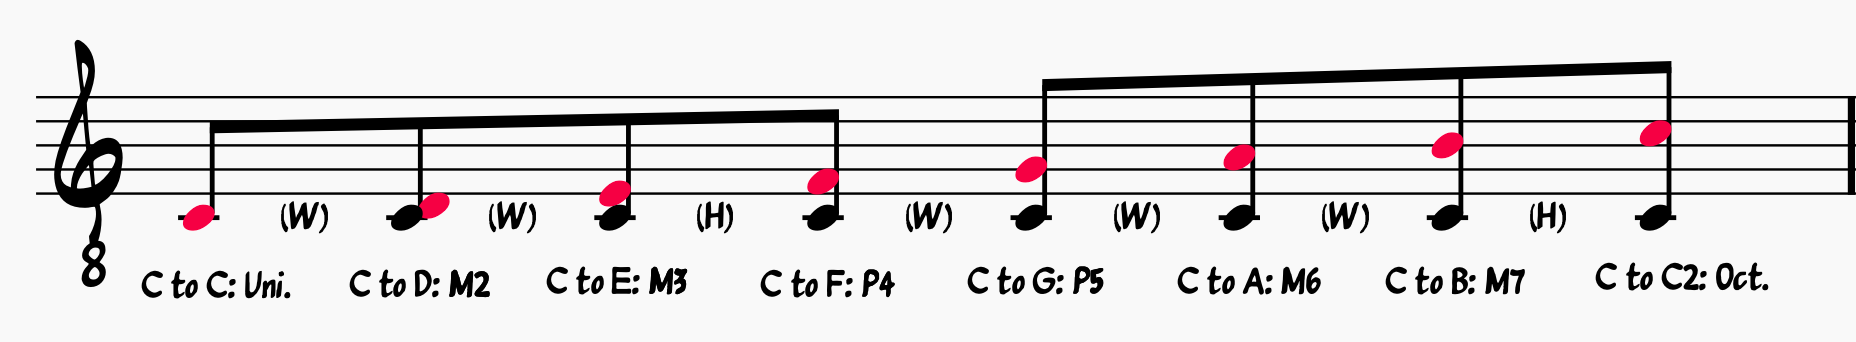 Musical Scales: C major scale with interval relationships